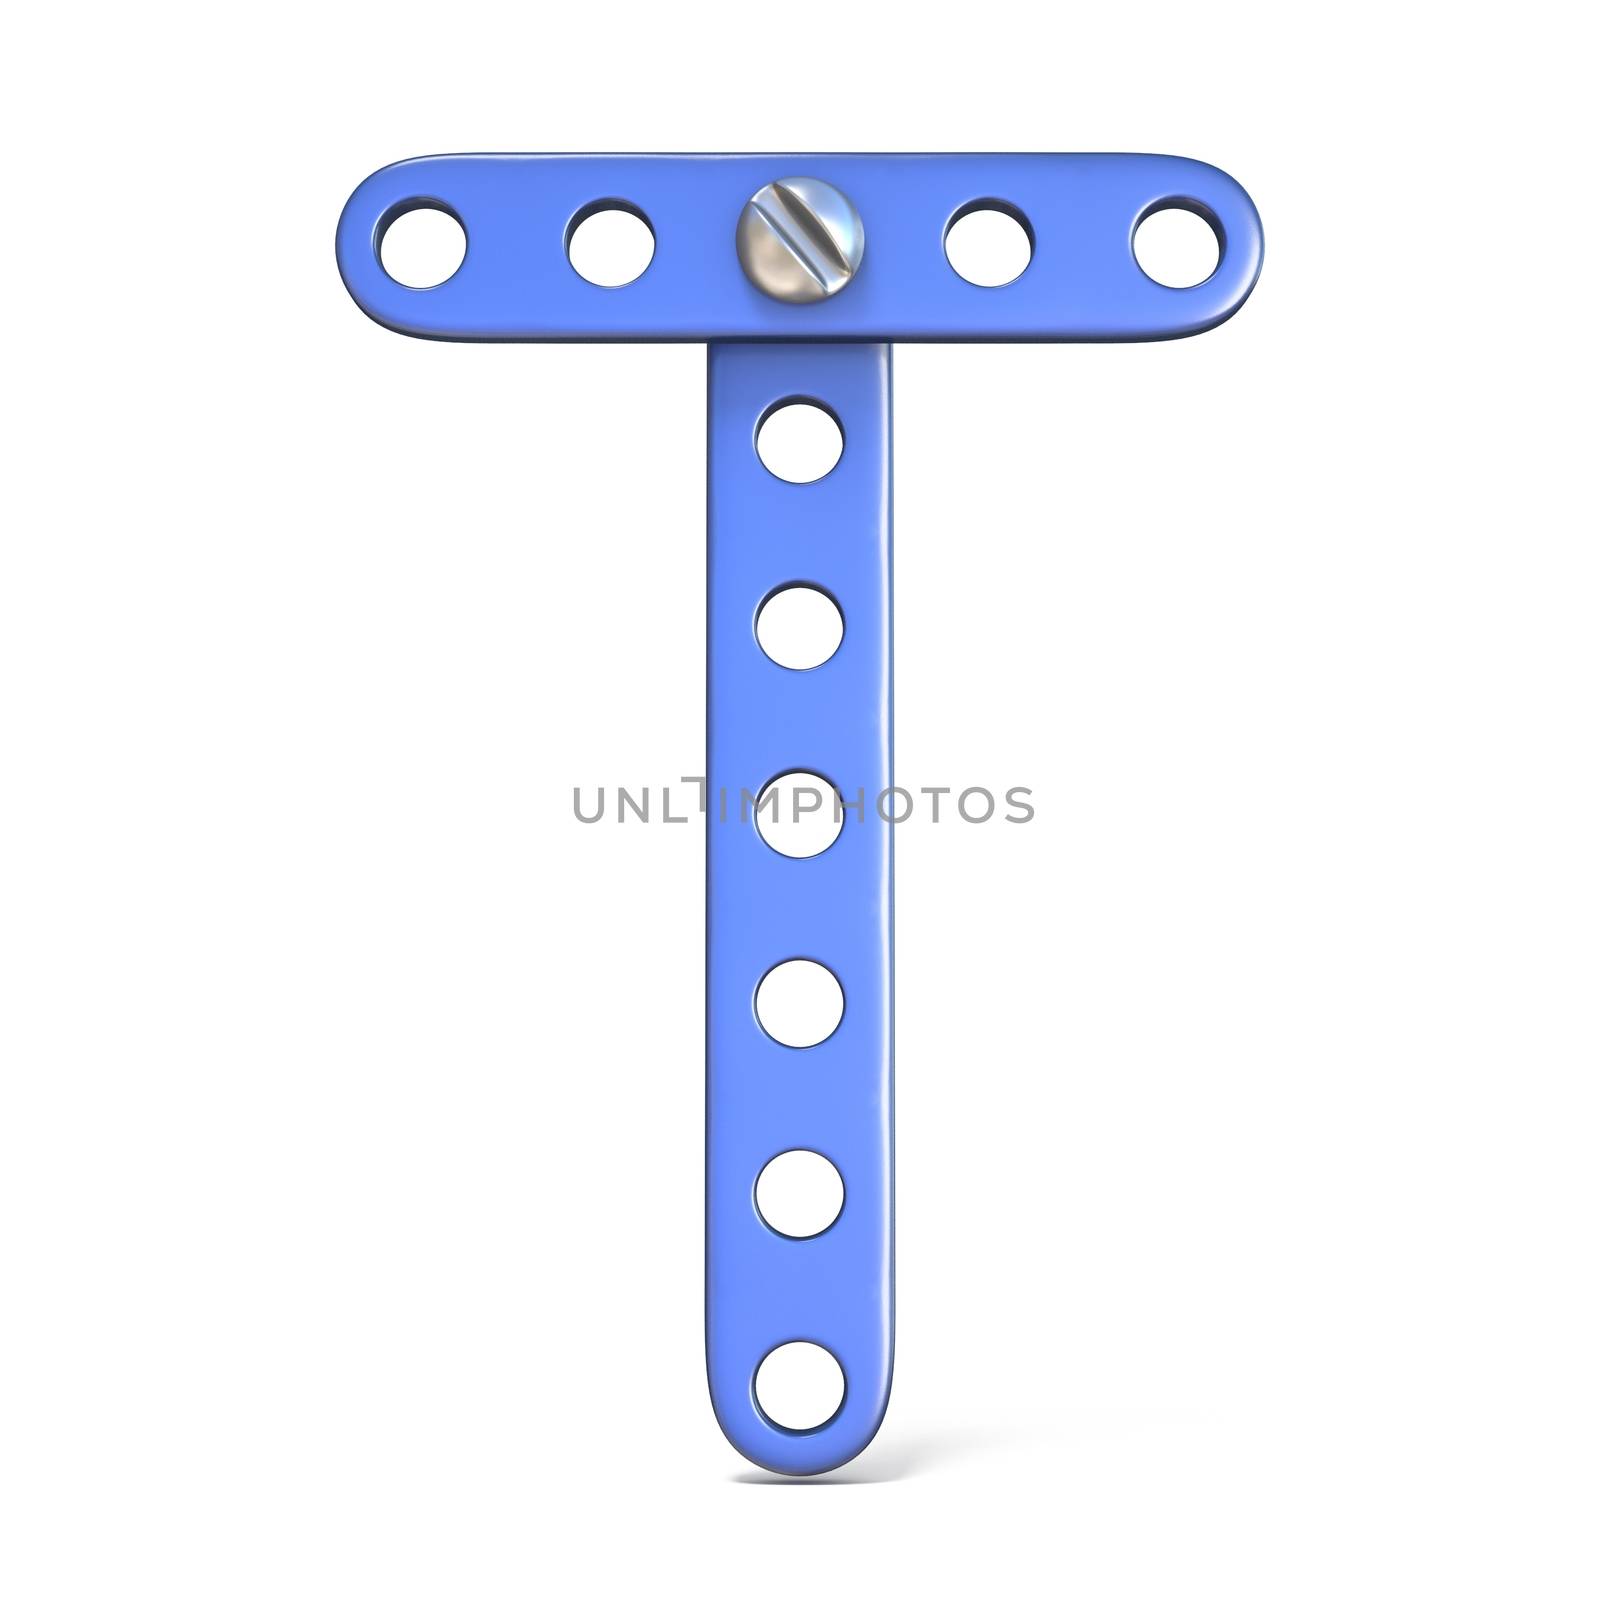 Alphabet made of blue metal constructor toy Letter T 3D render illustration isolated on white background